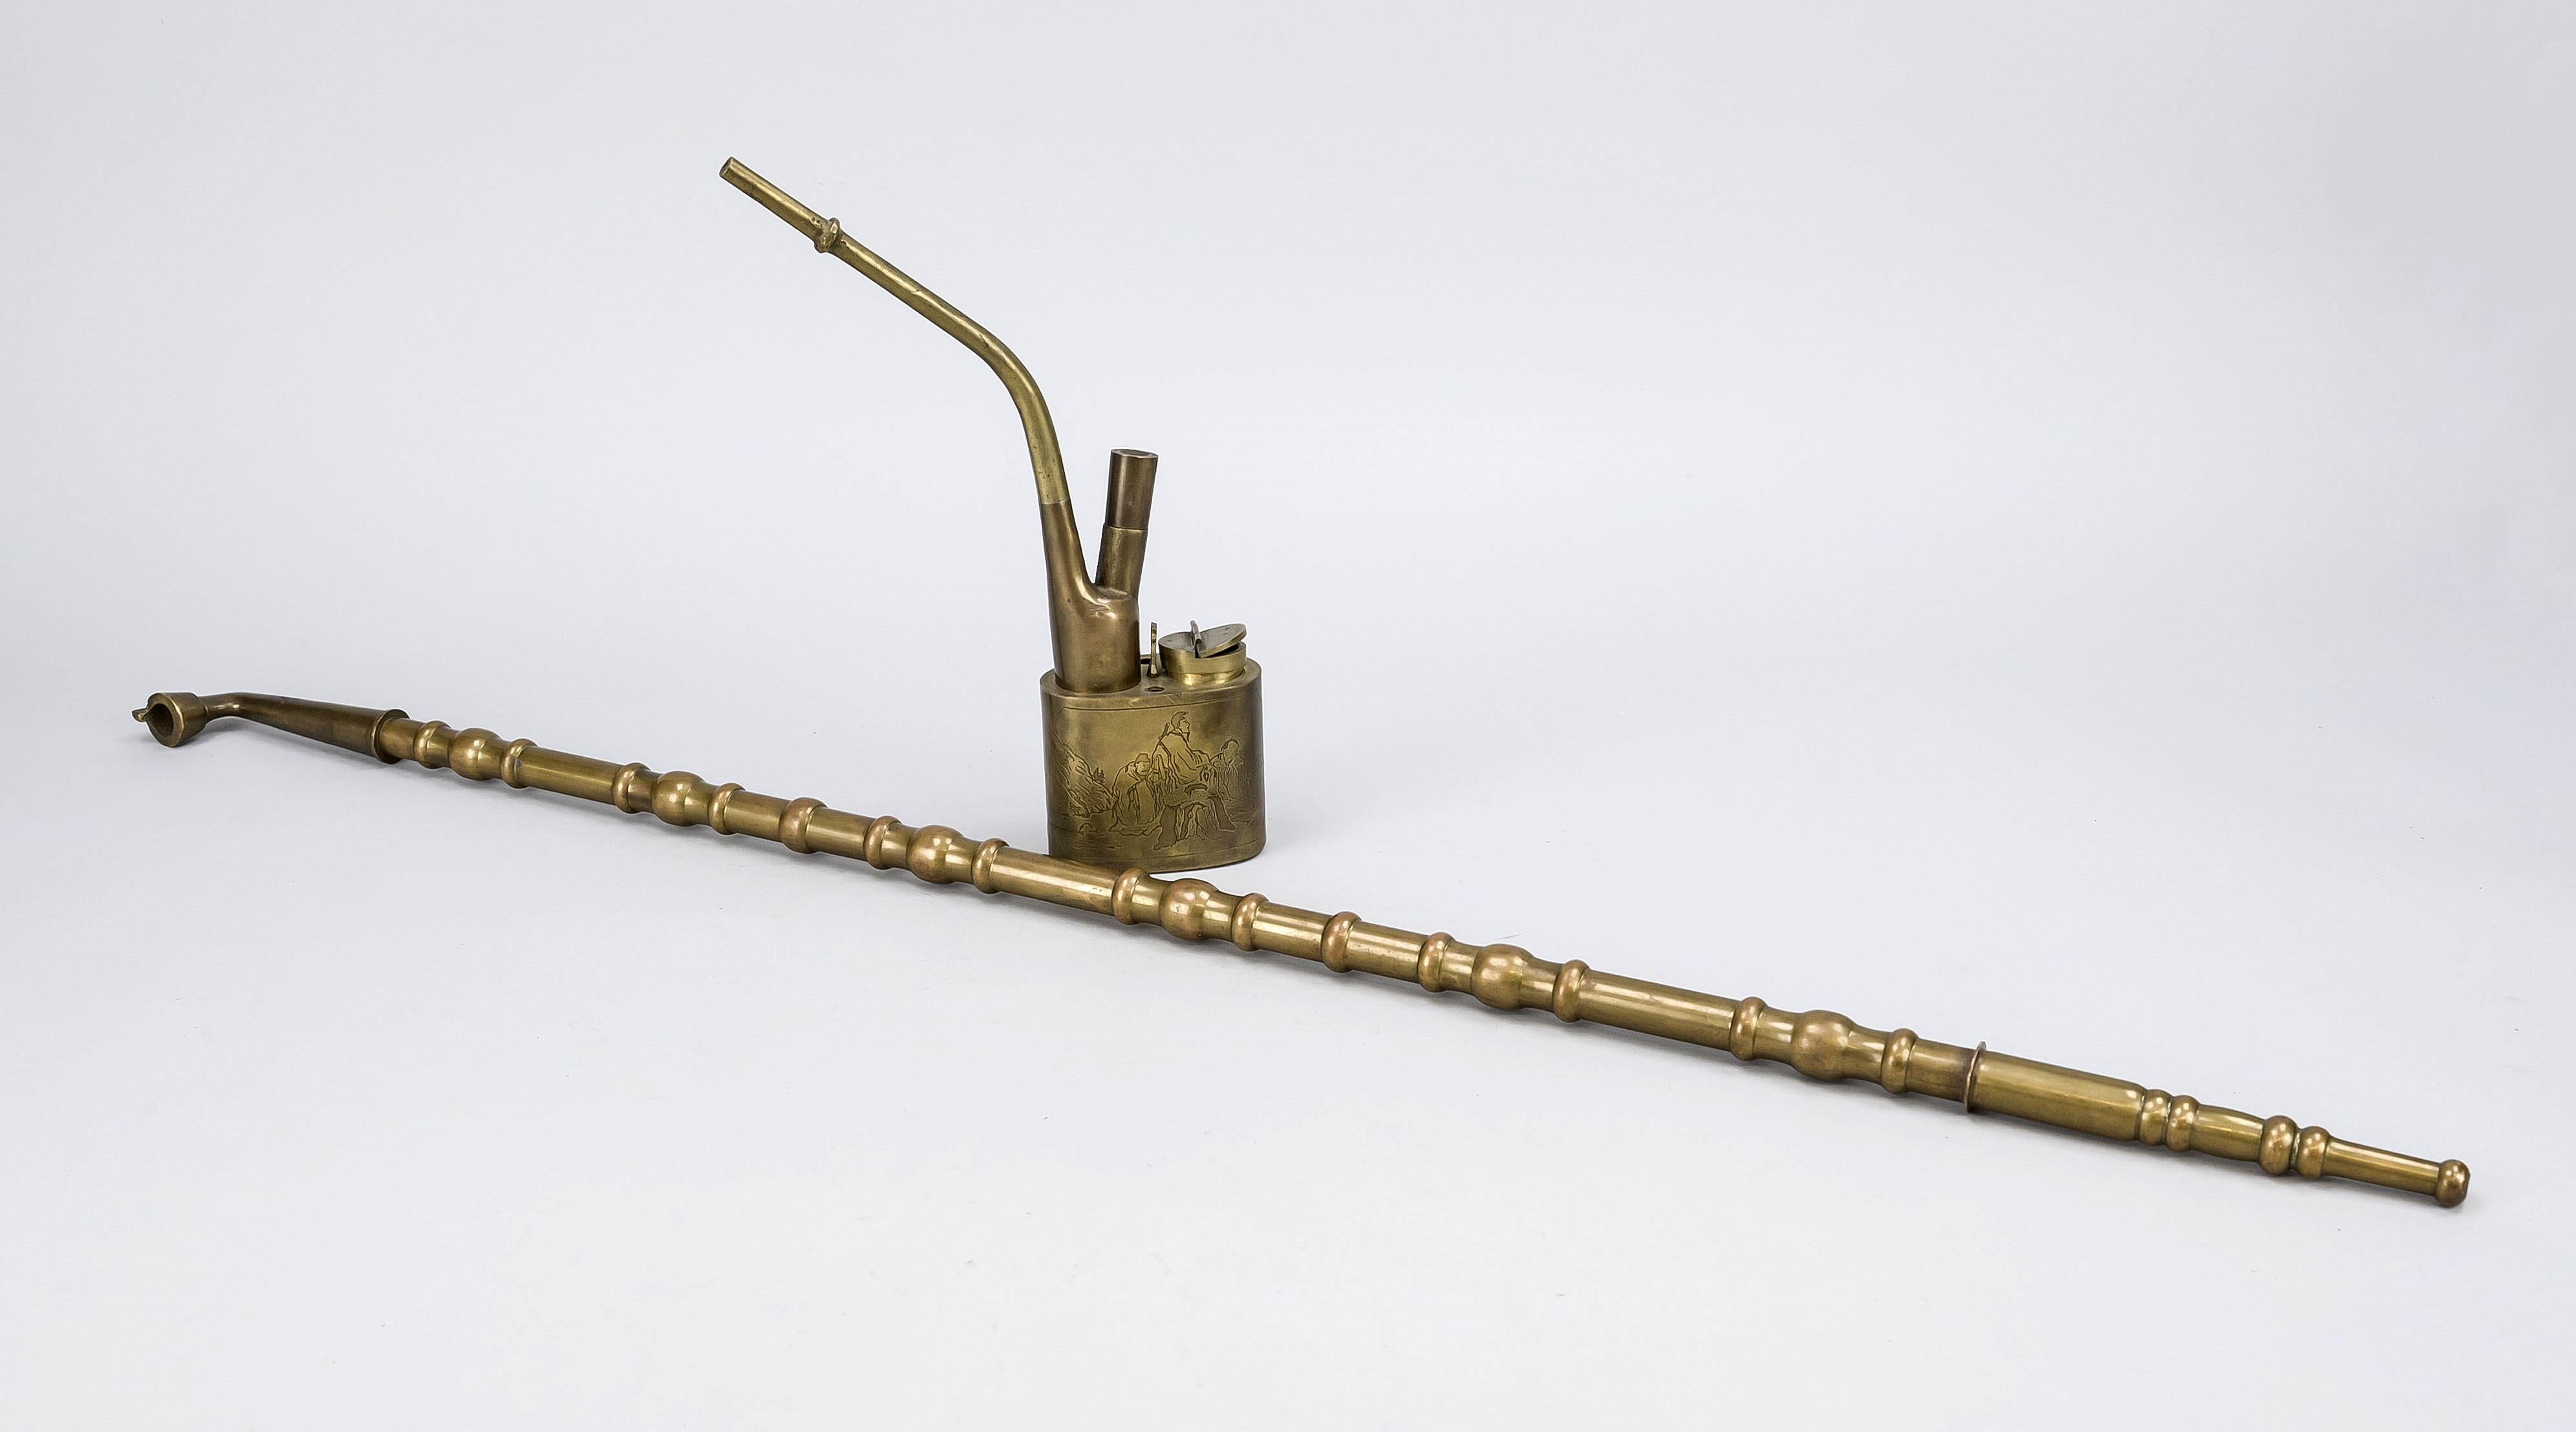 2 Opium pipes, China 19th century (Qing), brass. 1 x long pipe in turned look, l. 94 cm. 1 x with